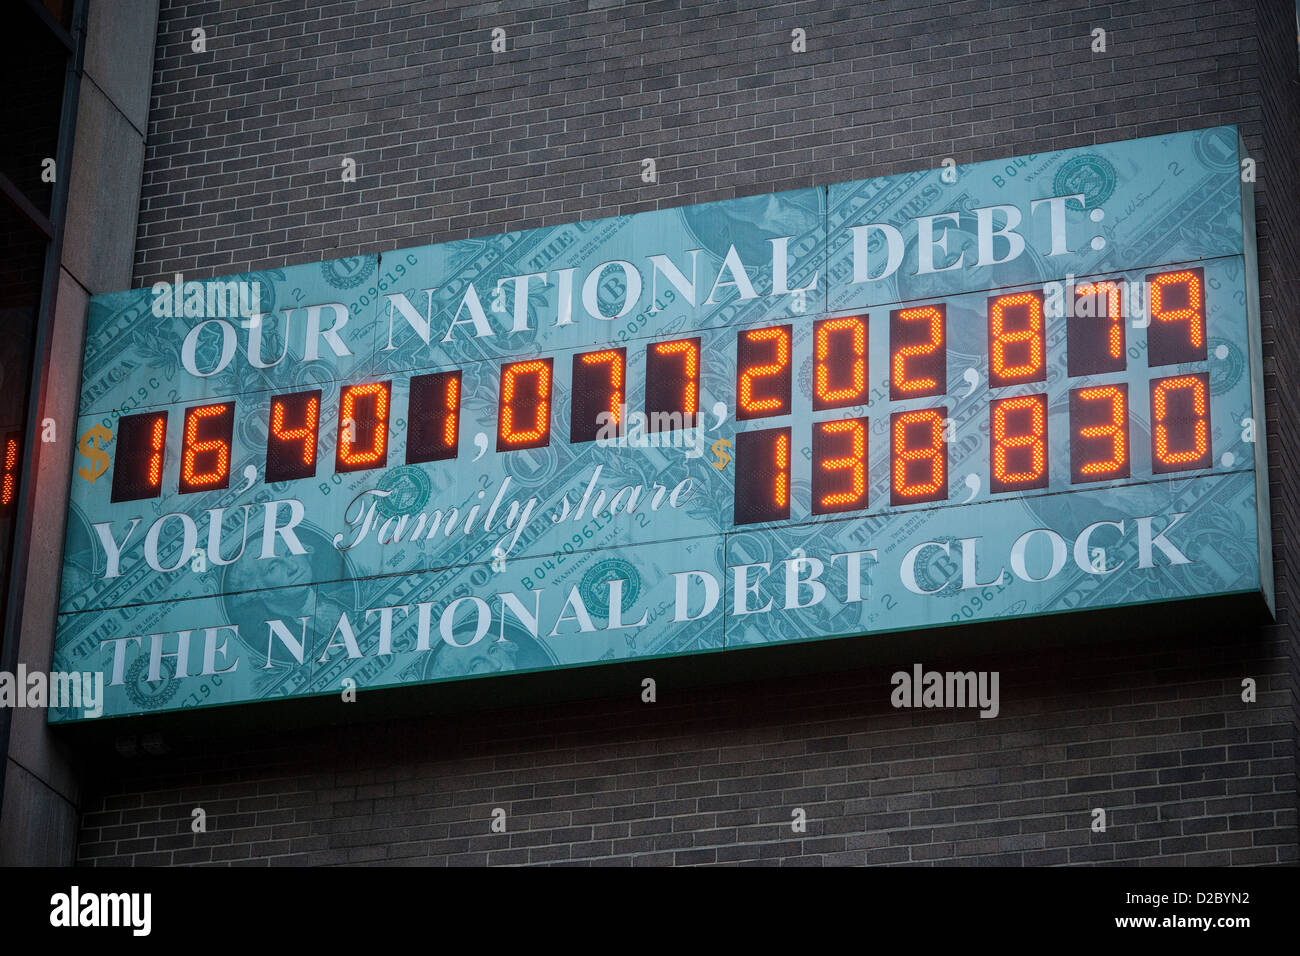 The National Debt Clock in New York showing the US debt as over $16 trillion Stock Photo